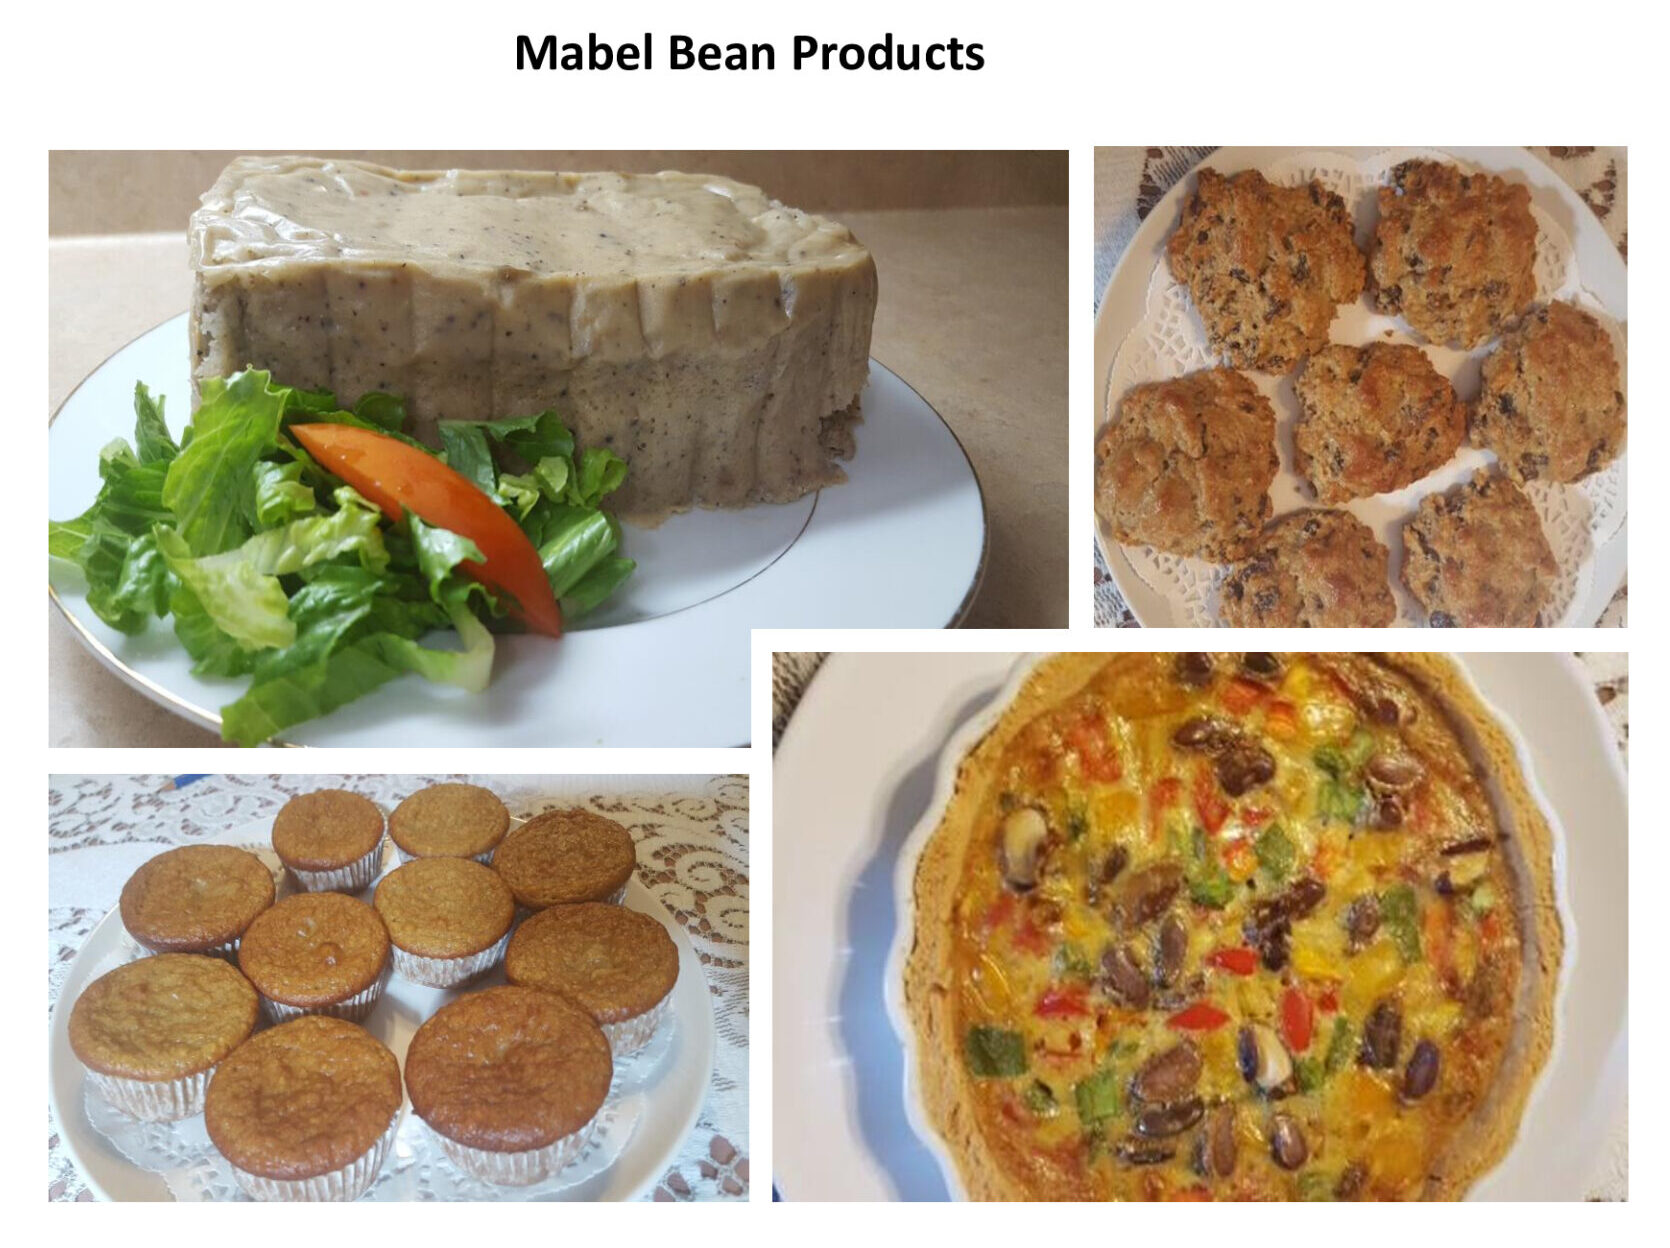 Mabel bean products